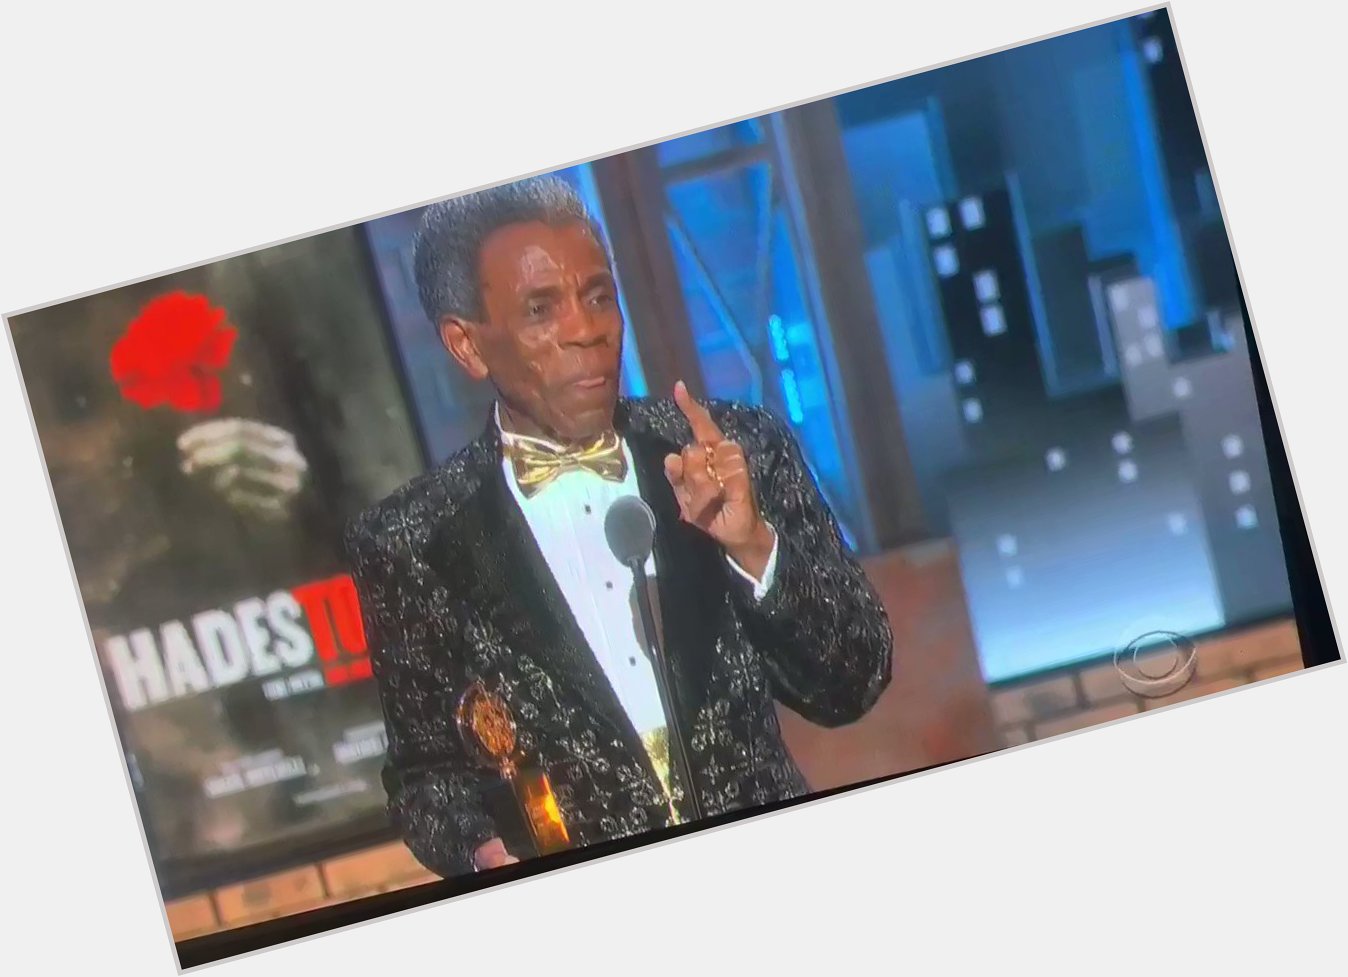 Happy Birthday to the legend, Andre de Shields... his Tony speech is forever my favorite.  